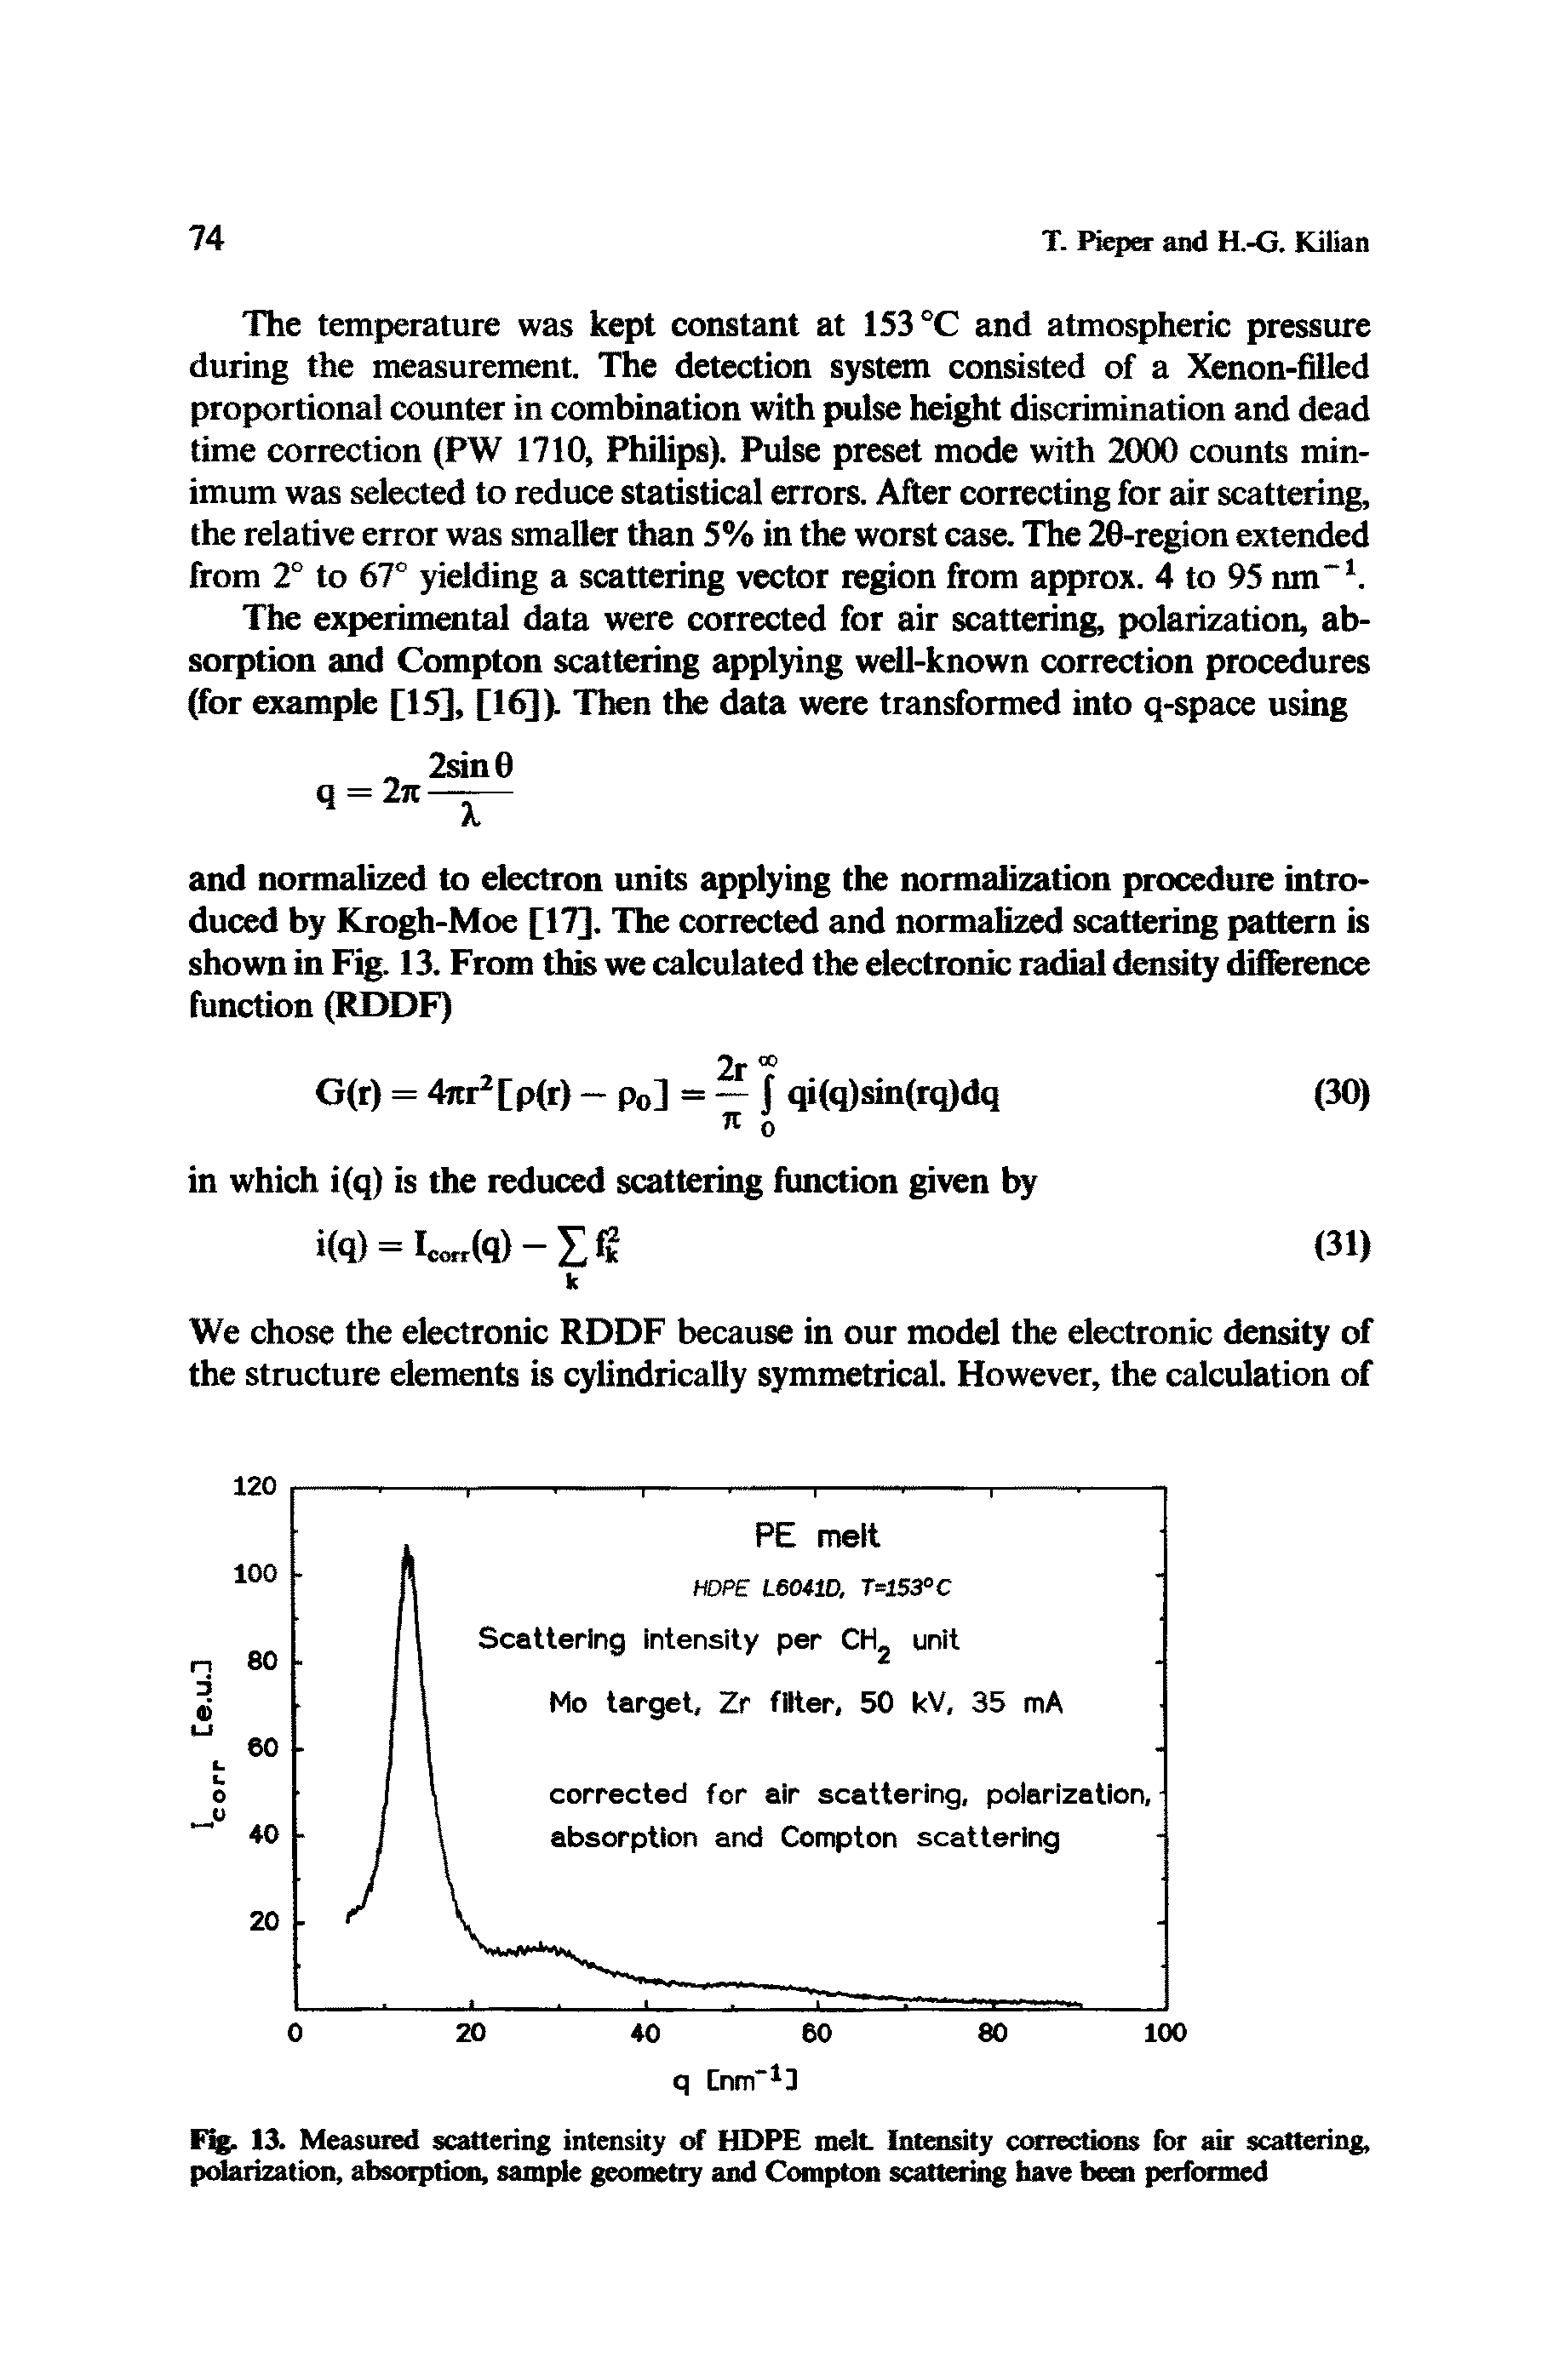 Fig. 13. Measured scattering intensity of HDPE melt. Intensity corrections for air scattering, polarization, absorption, sample geometry and Compton scattering have beat performed...